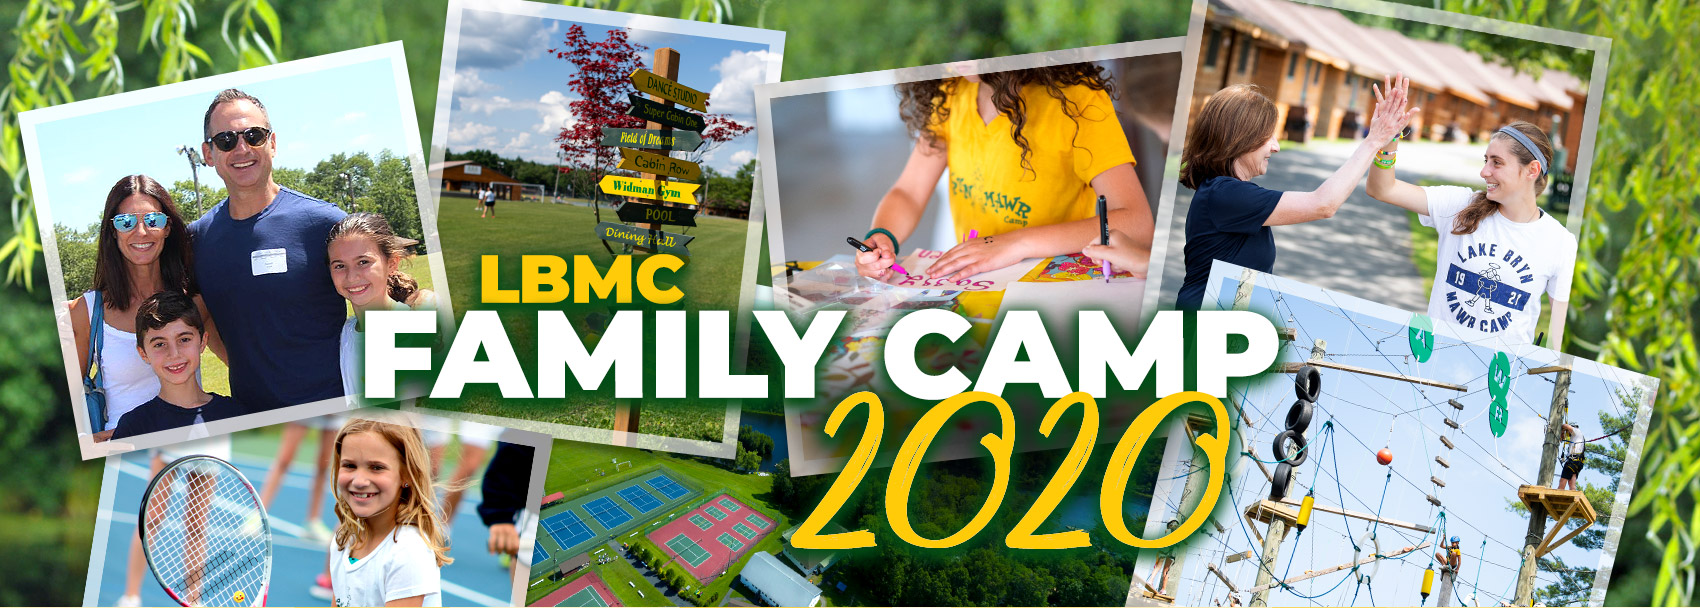 Family Camp 2020